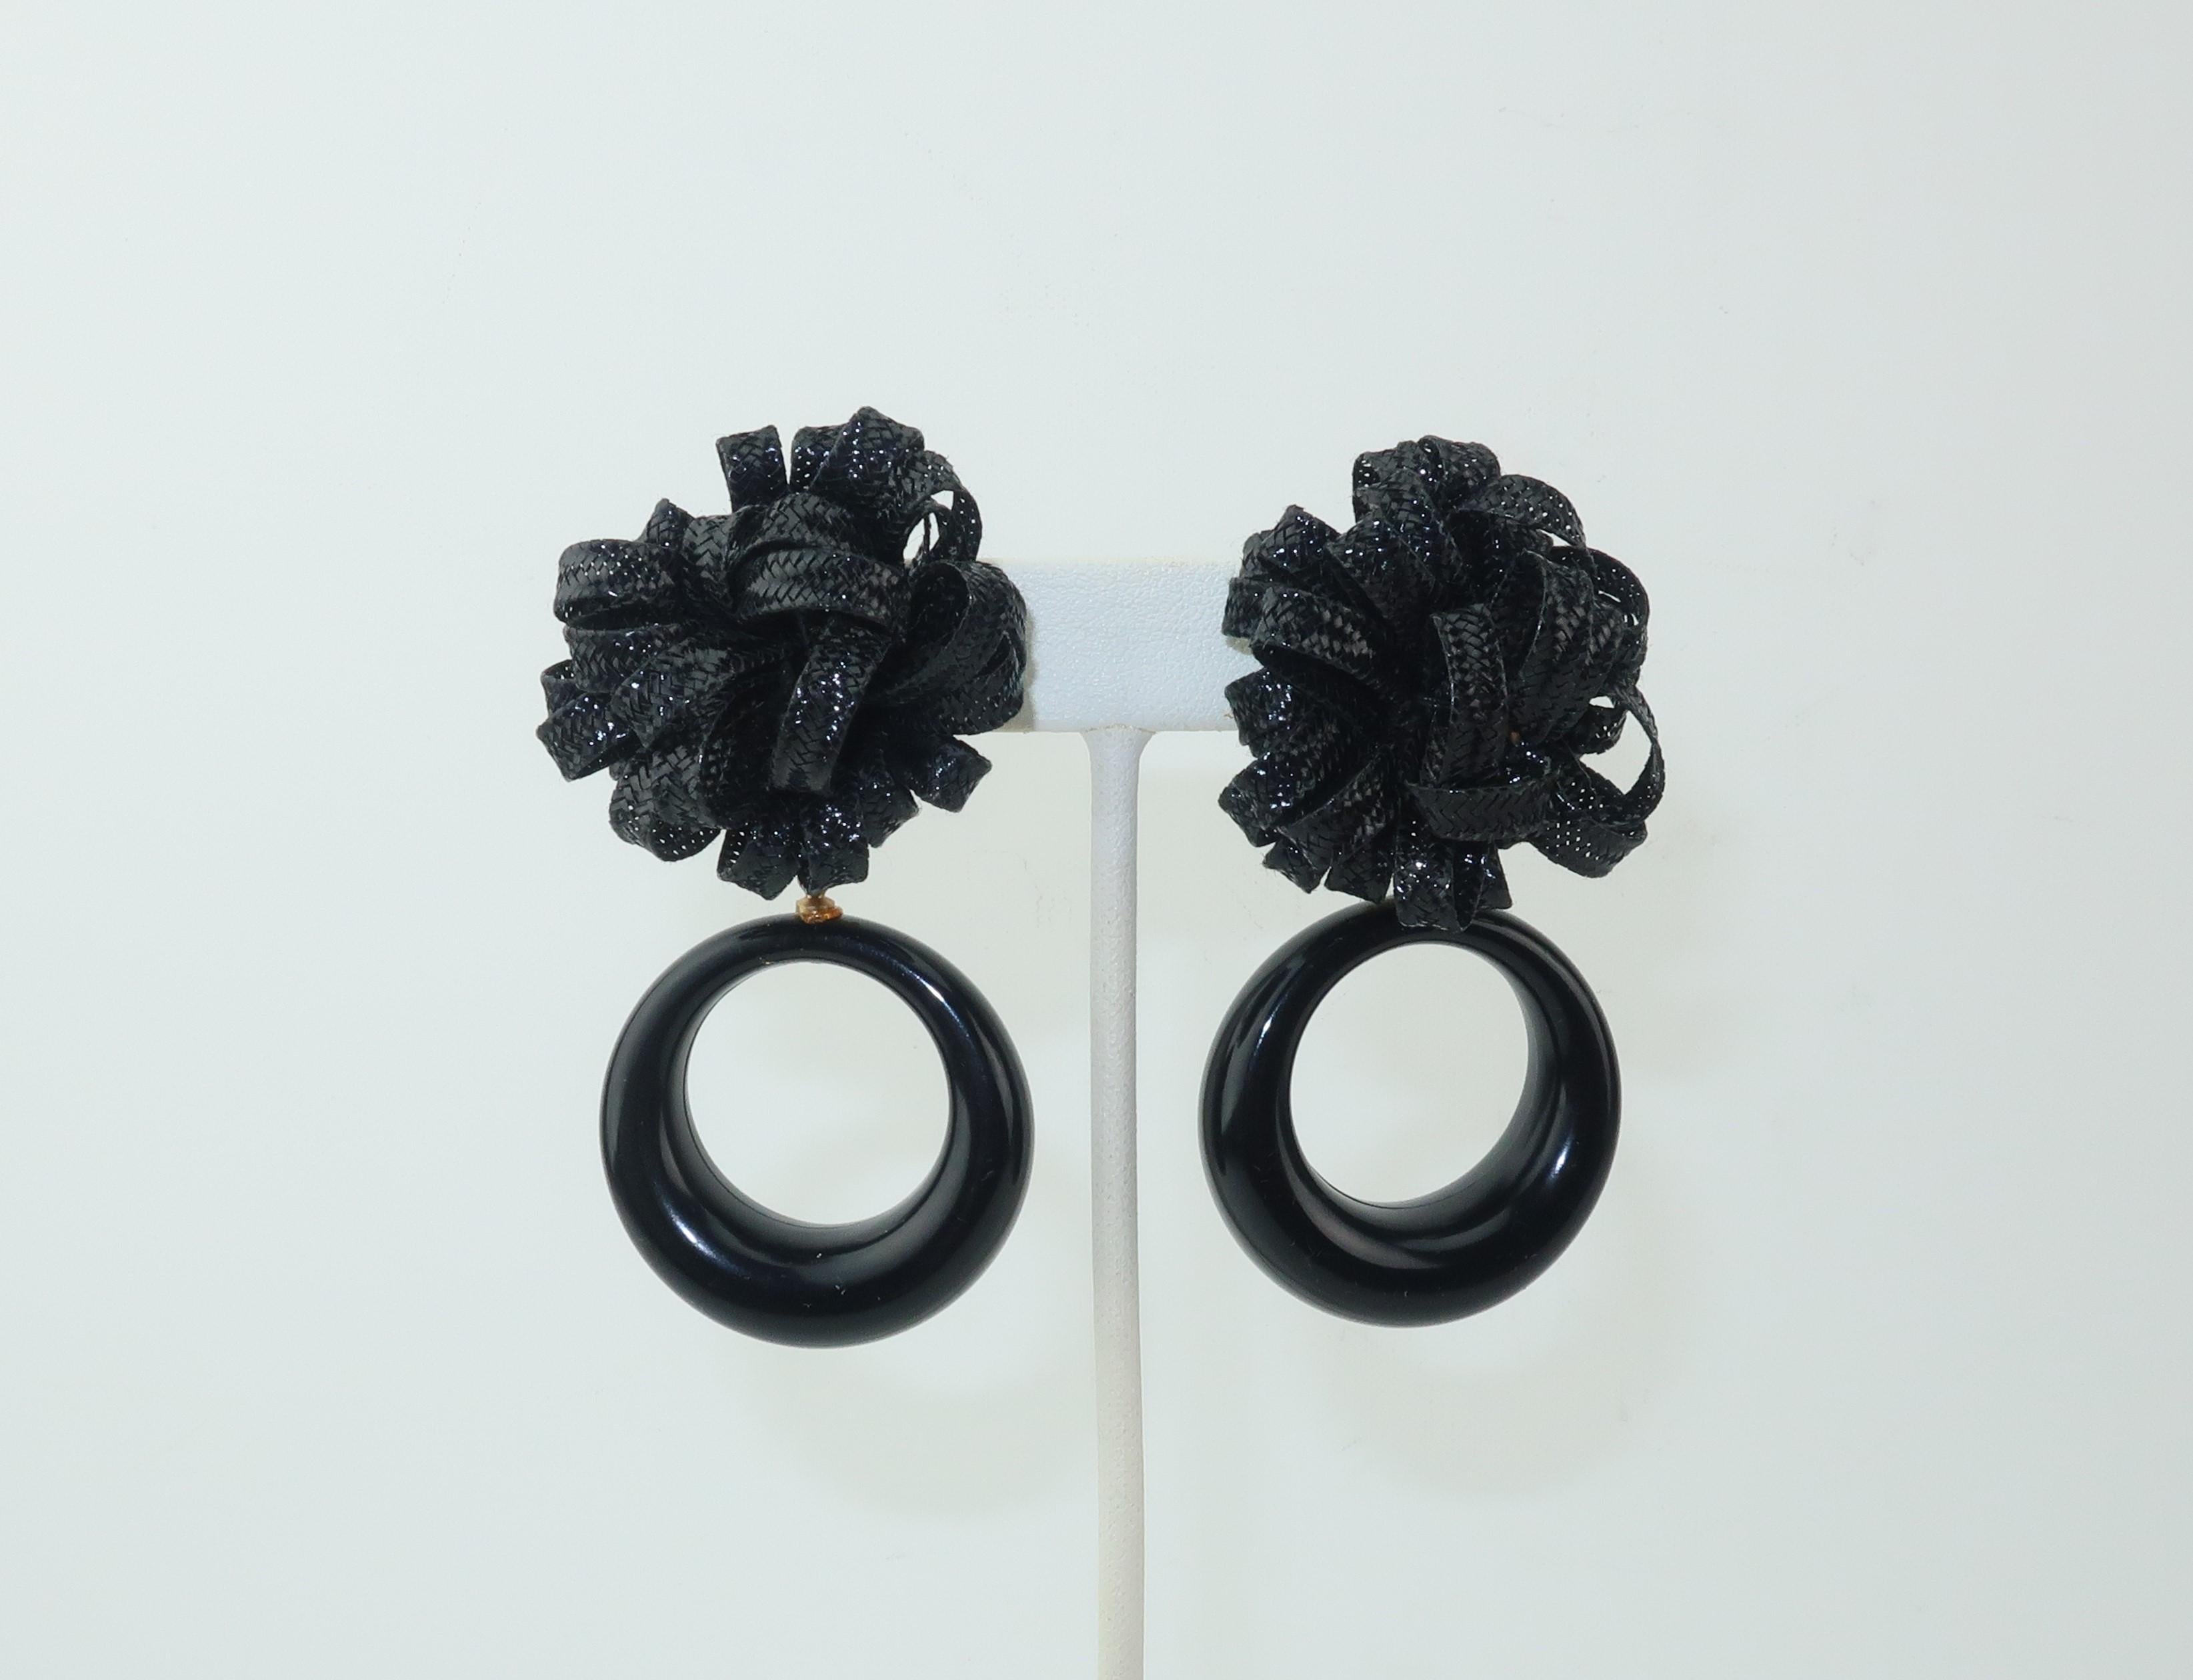 Cha cha charming!  These clip on earrings are a whole lotta fun with a synthetic raffia base providing a pouf for the black plastic dangle hoops.  They are perfect for adding a little whimsy to cocktail attire and equally ideal for adding pizzazz to